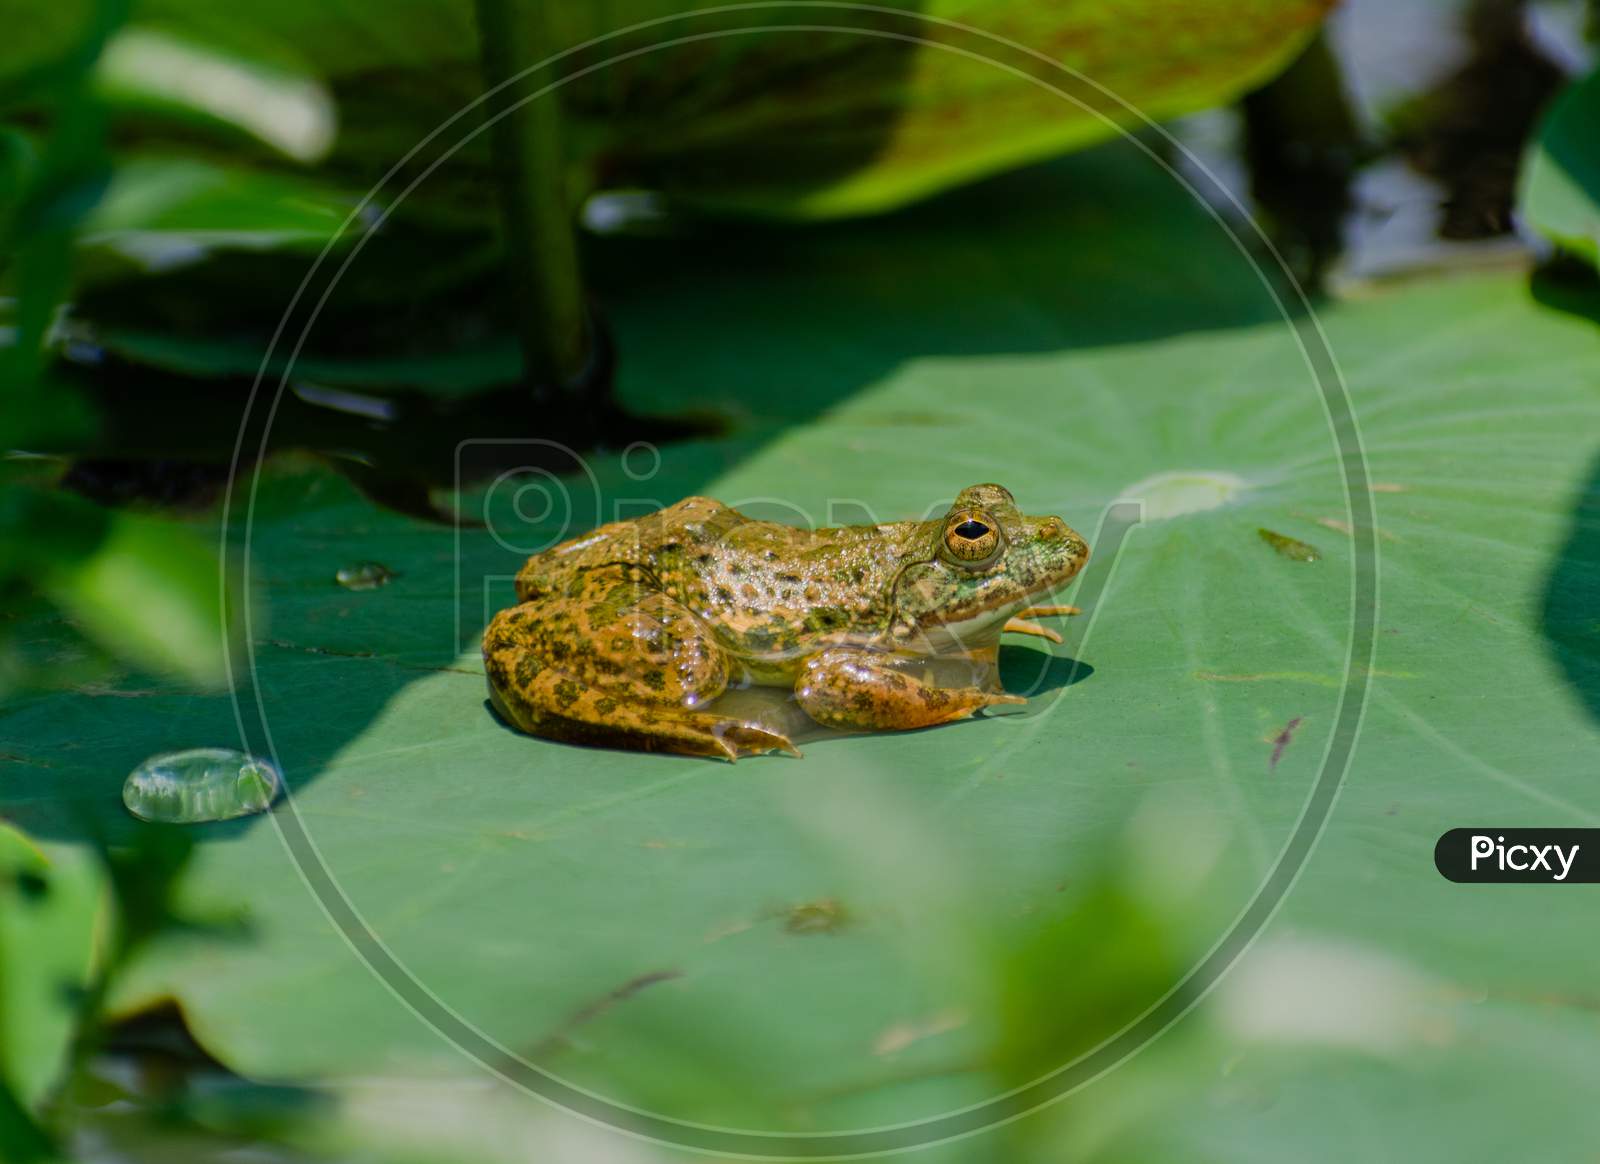 TINY GREEN FROG SITTING ON A LOTUS LEAF